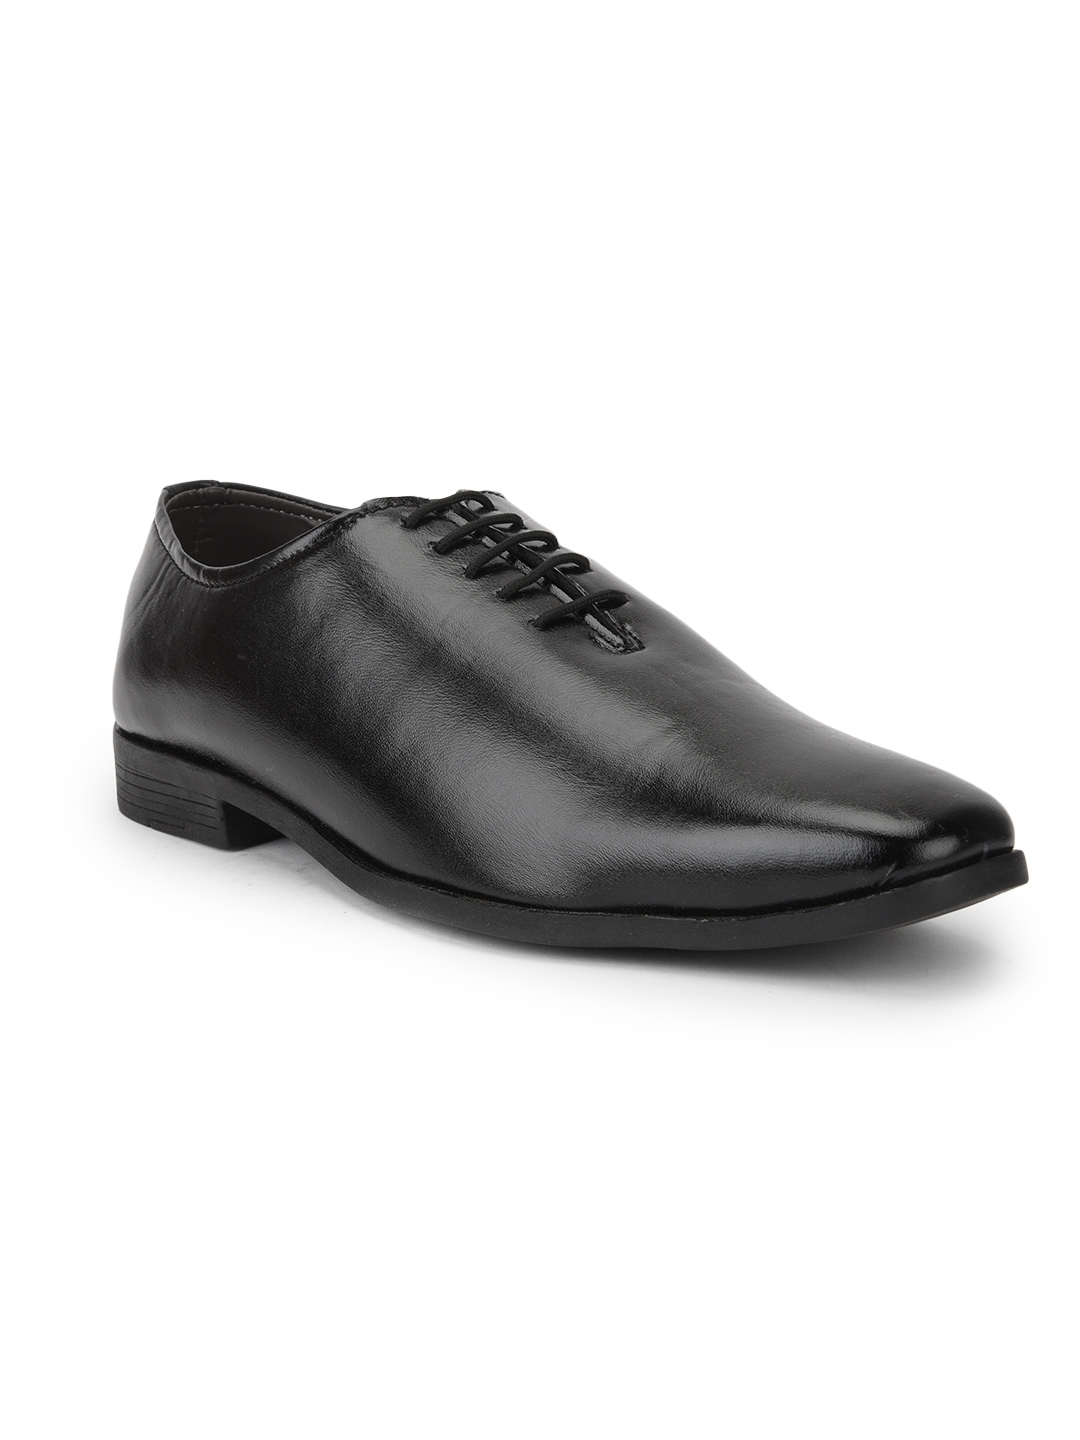 Liberty | Fortune by Liberty Black Formal Lace-ups SRG-305E For :- Men